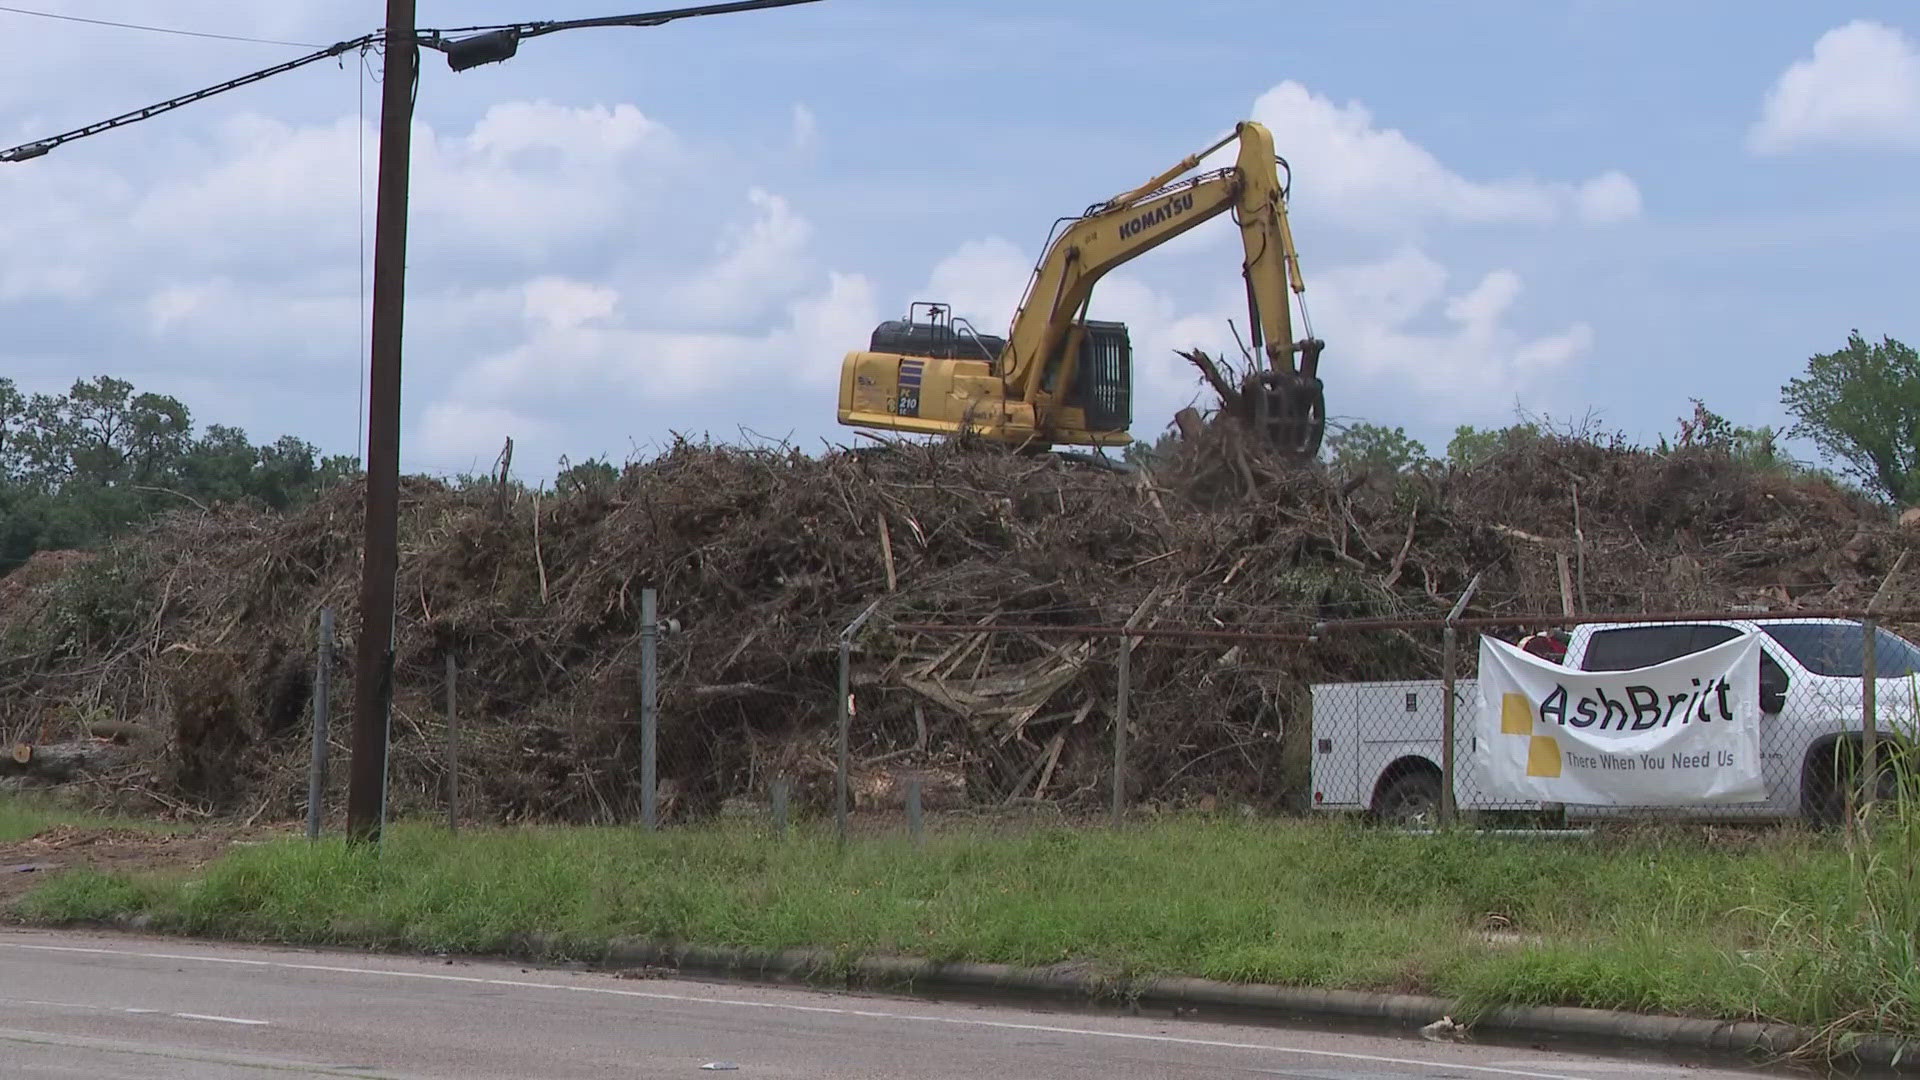 The City said it would be recycling the debris, partnering with multiple agencies that use mulch and work to get a lot of the debris distributed.